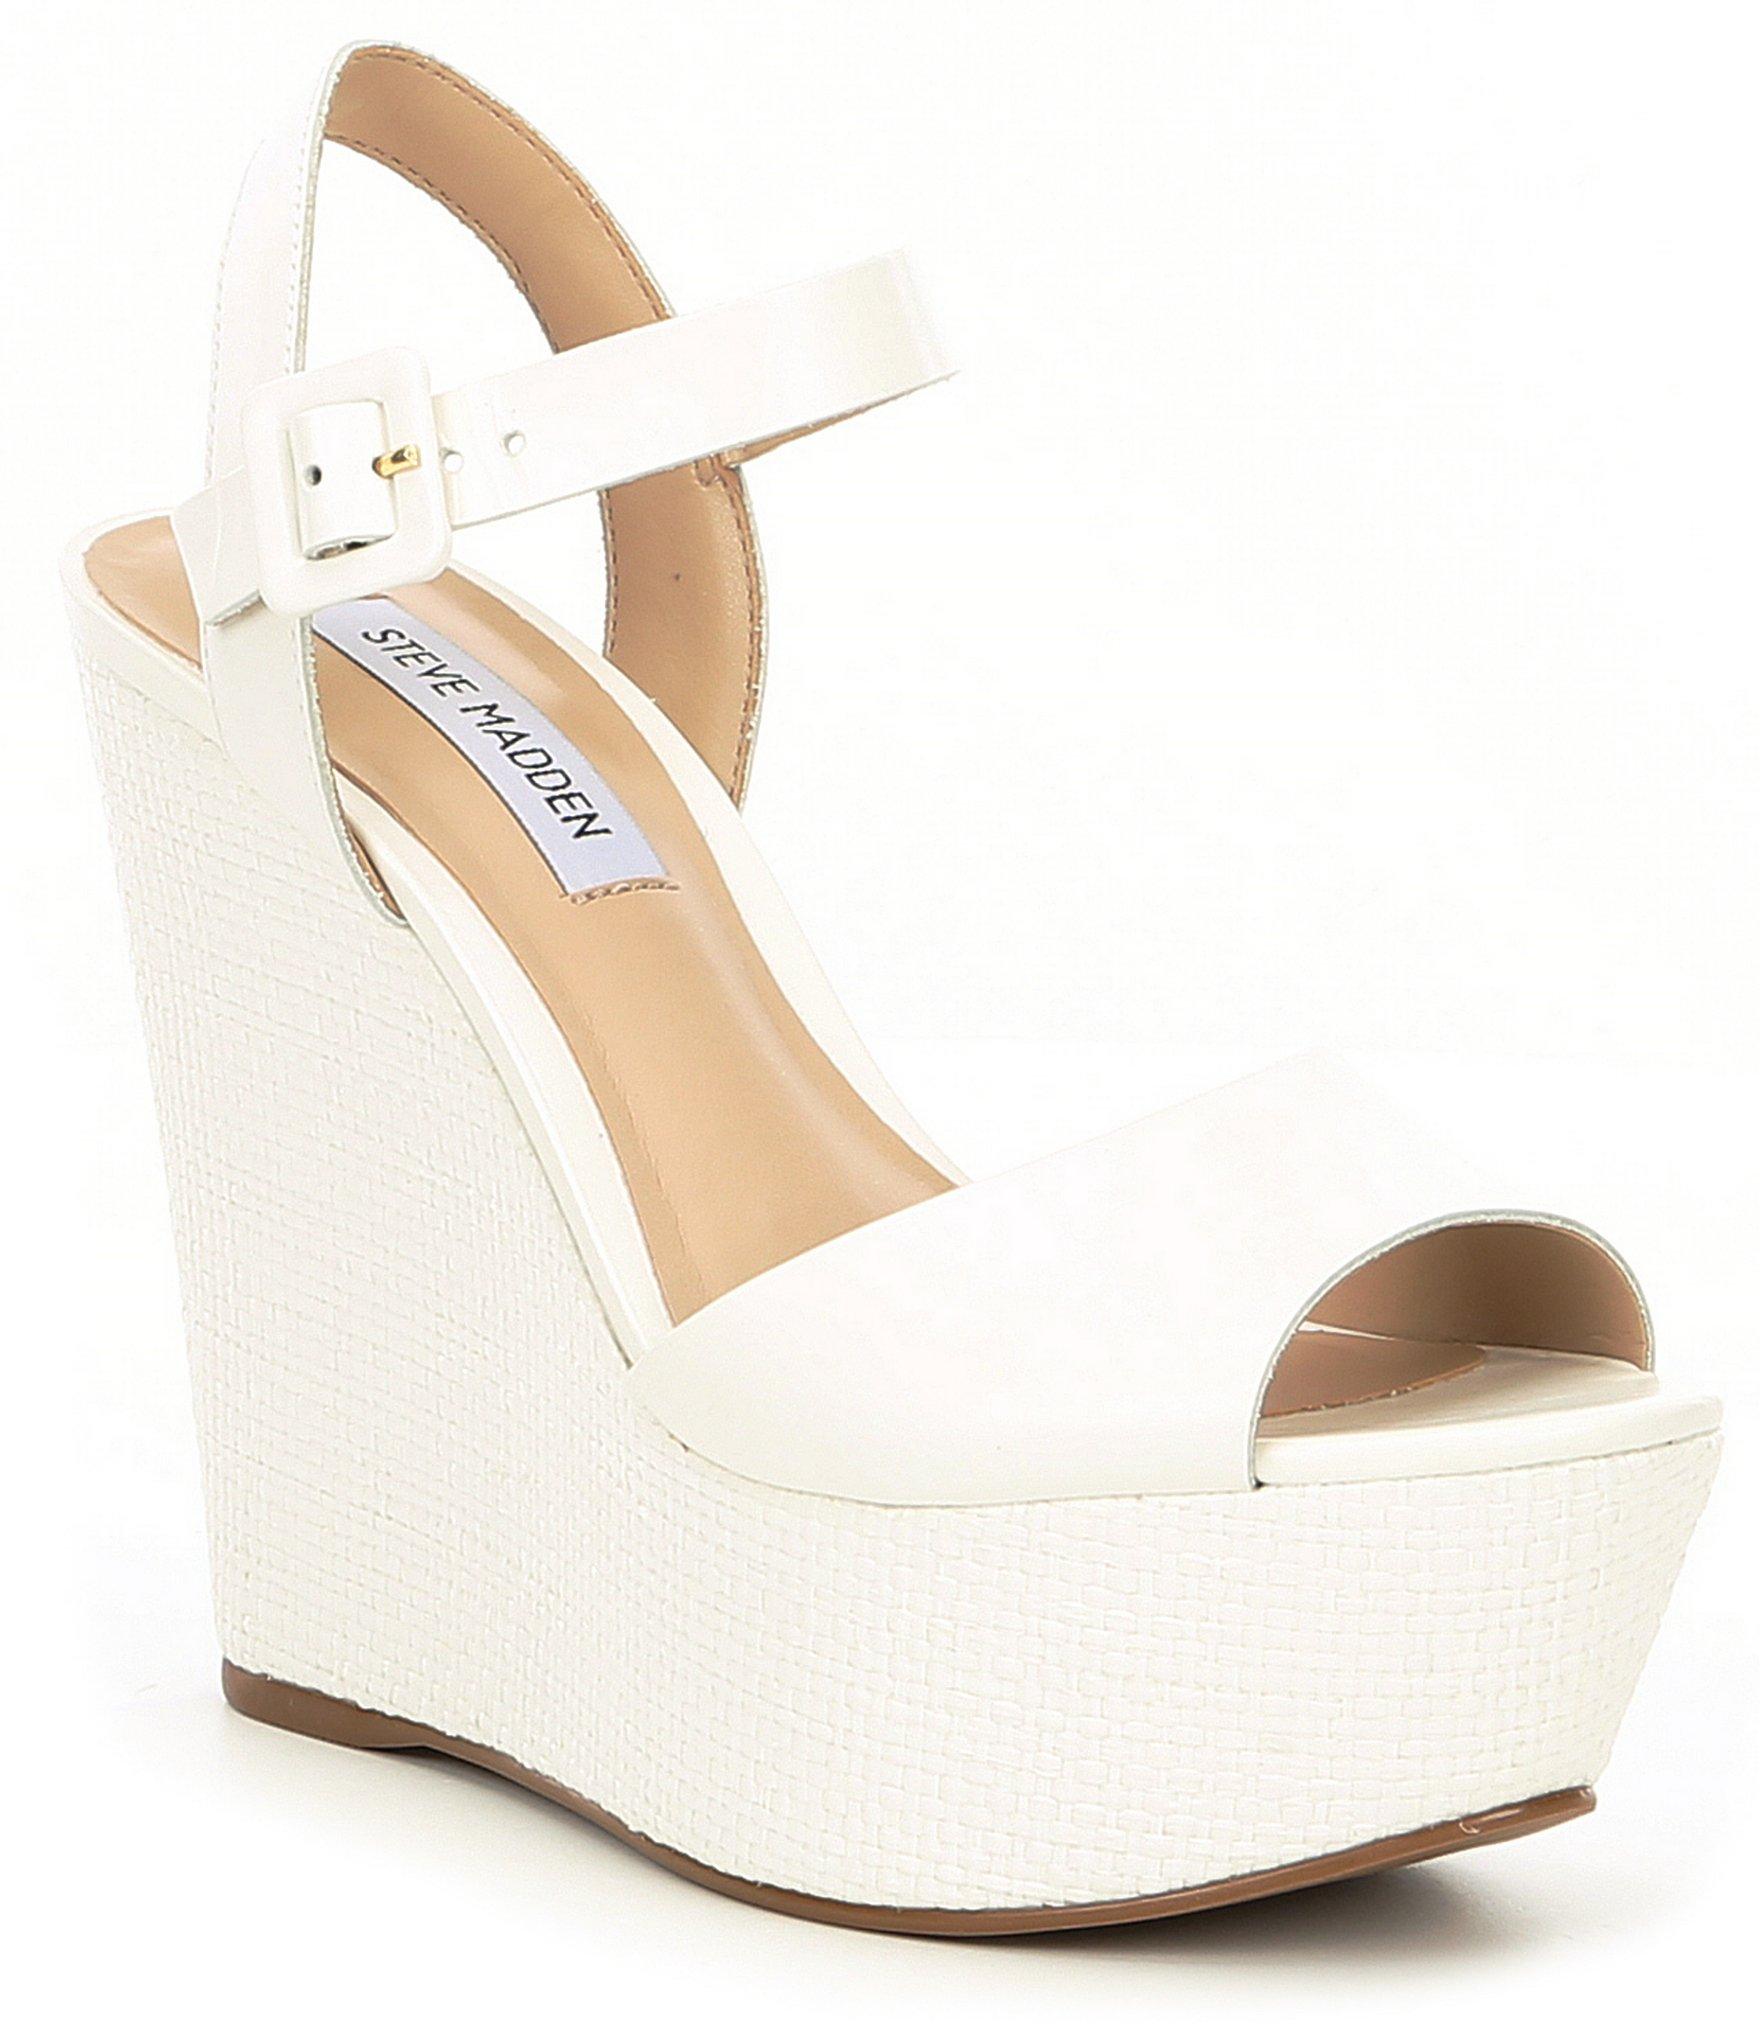 Steve Madden Citrus Wedge in White Leather (White) - Save 57% - Lyst